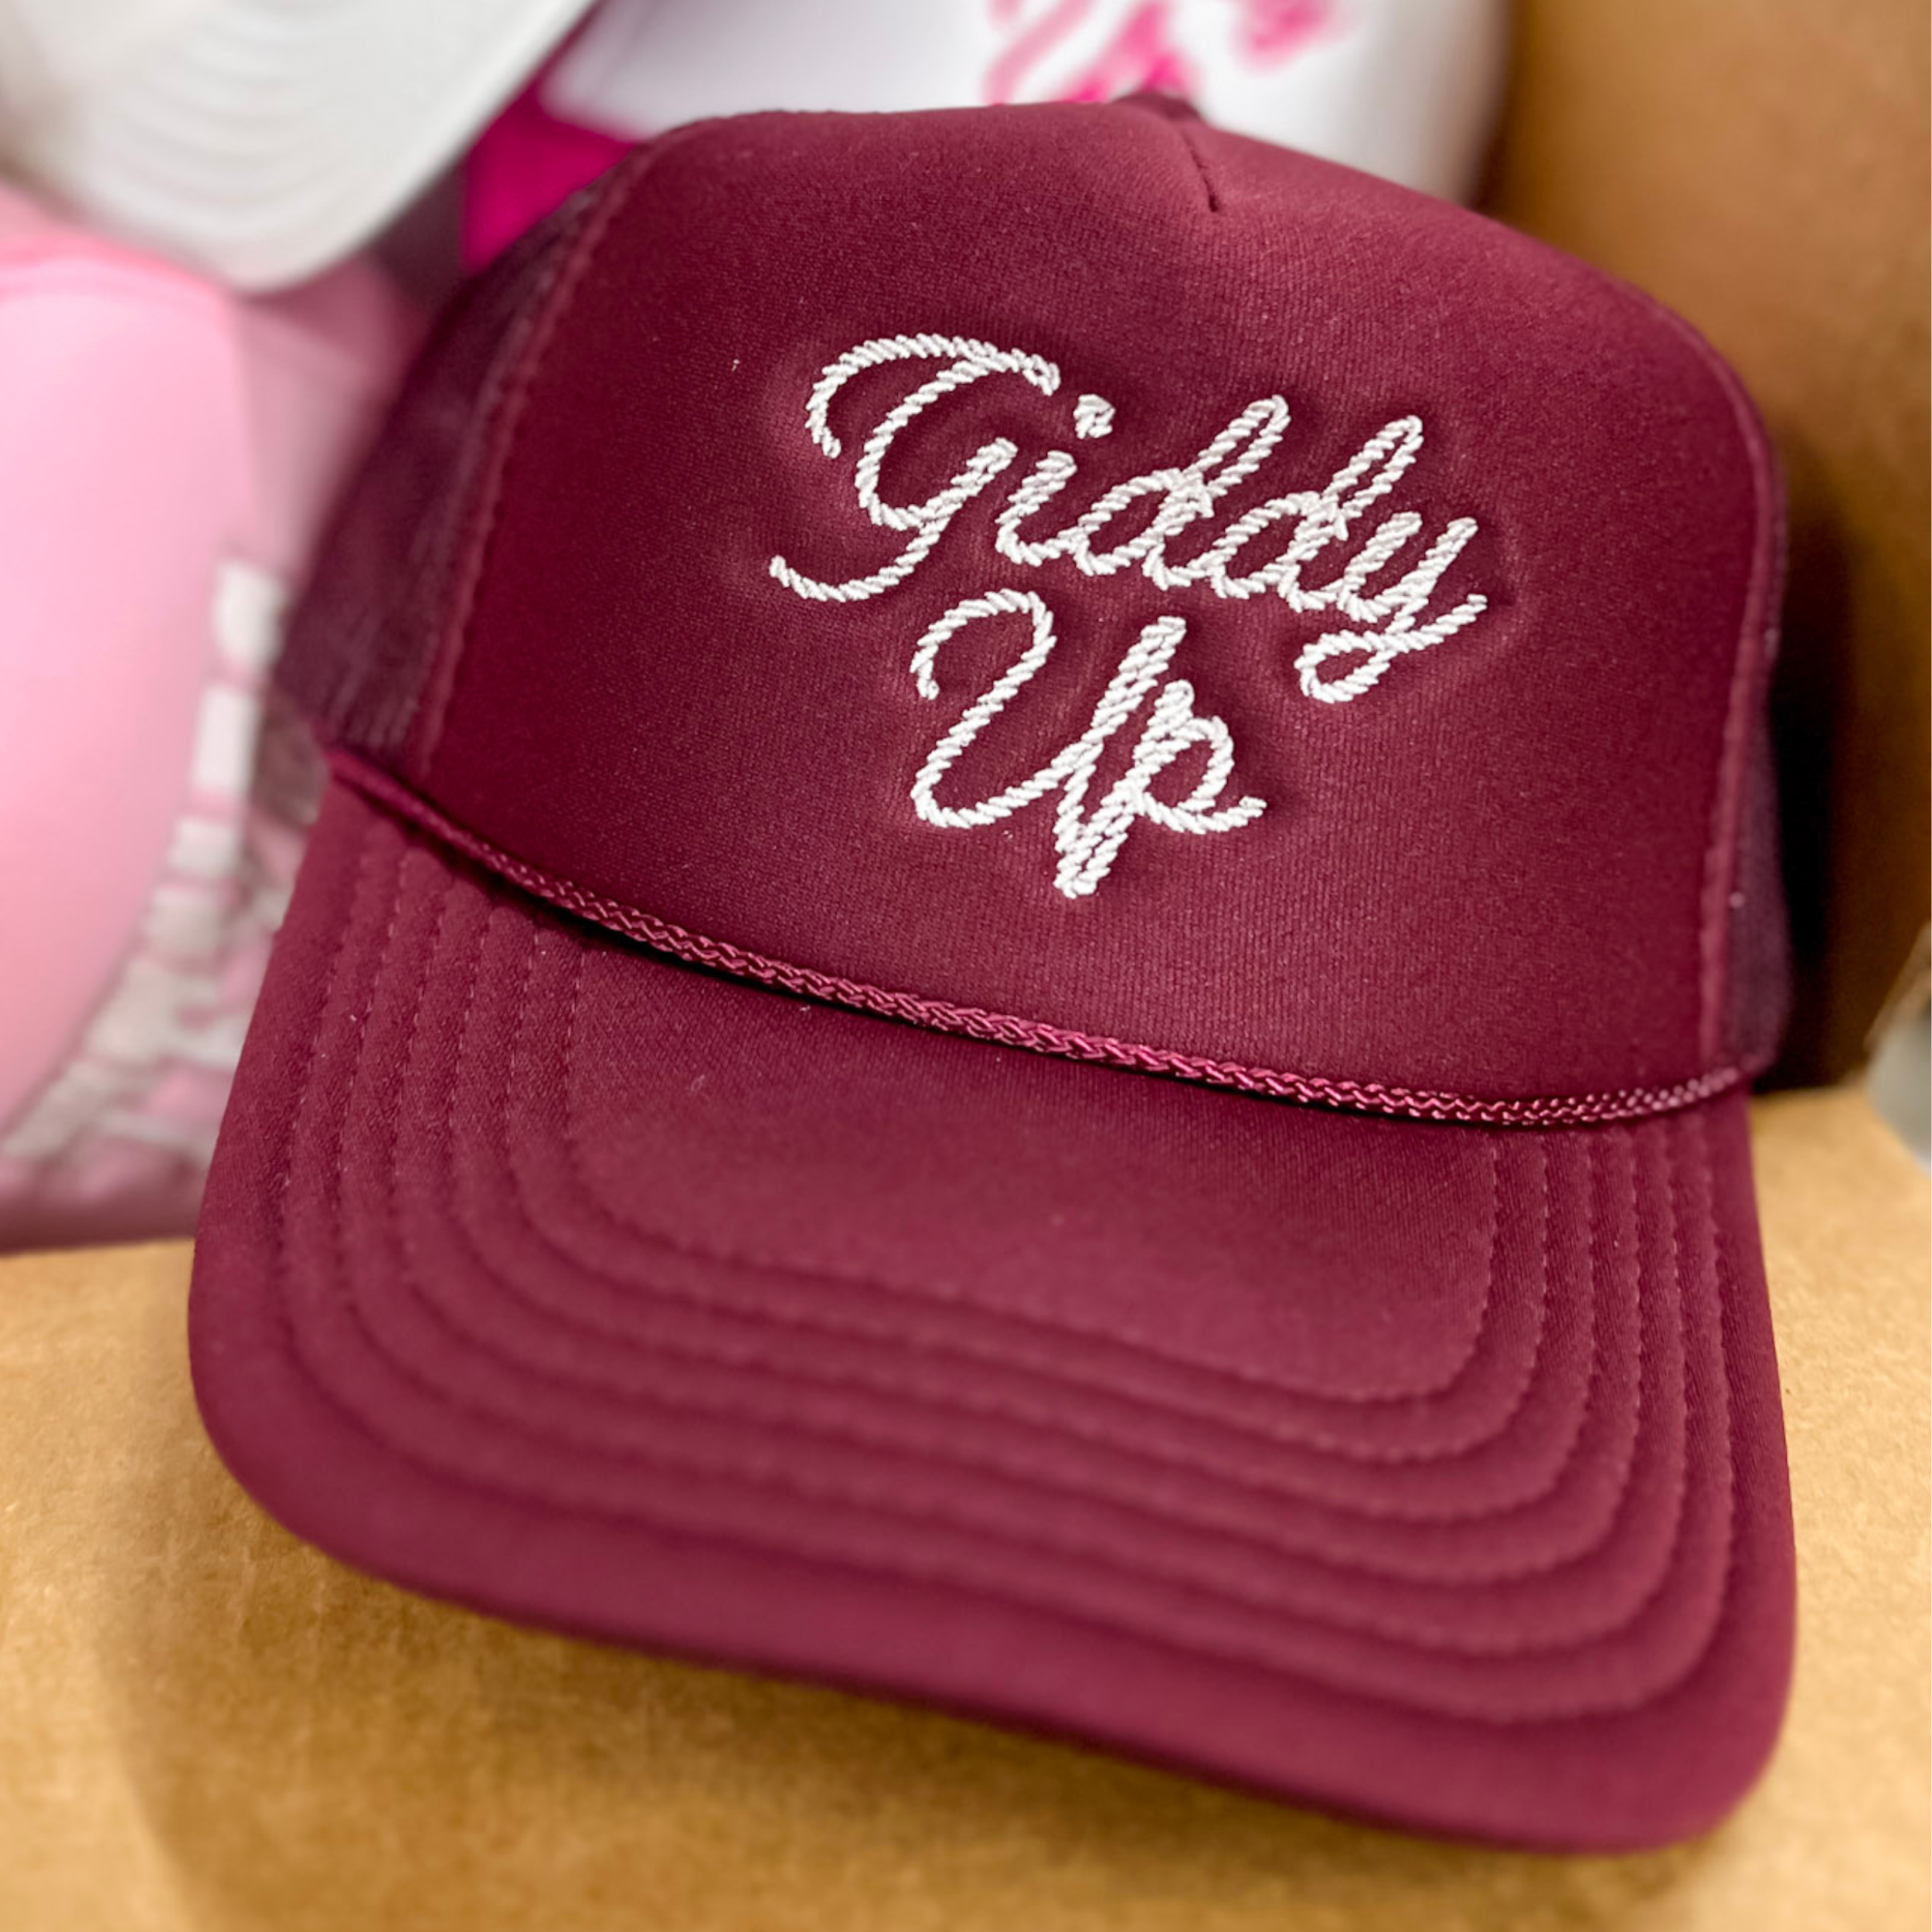 Photo features a maroon trucker hat with white cursive embroidery of the words giddy up on the front.